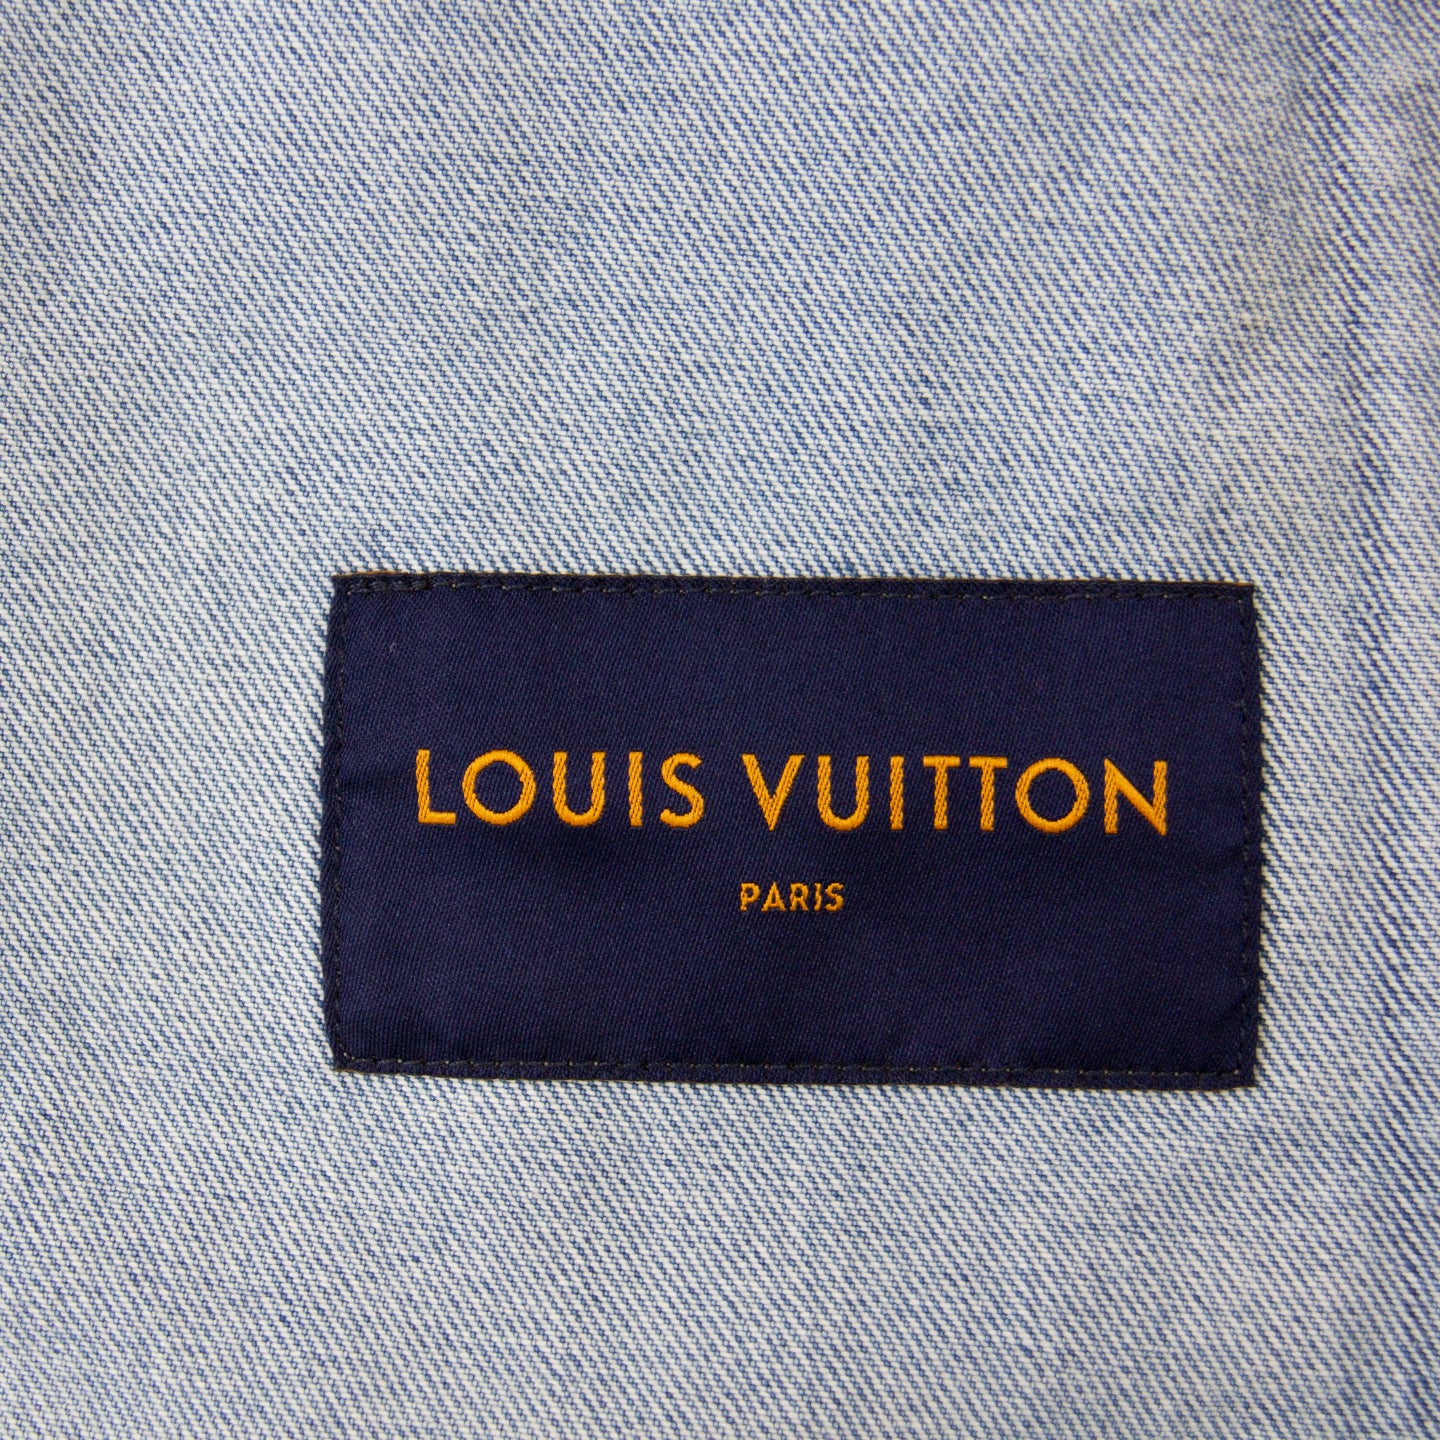 louis vuitton - clothing tags